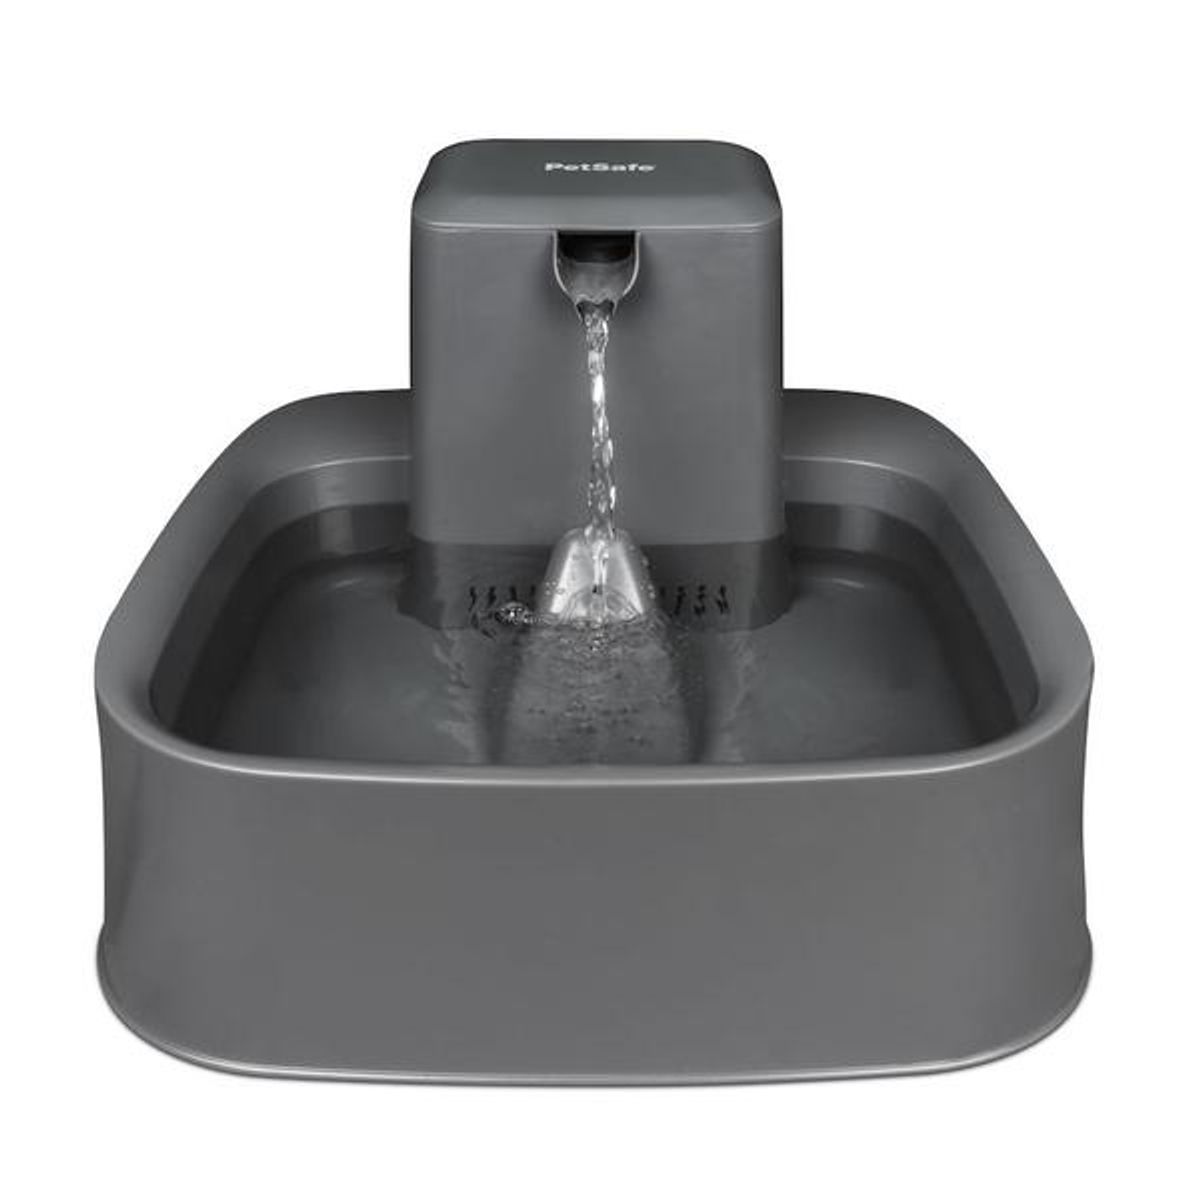 Fontaine Drinkwell 7.5 litres - Petsafe